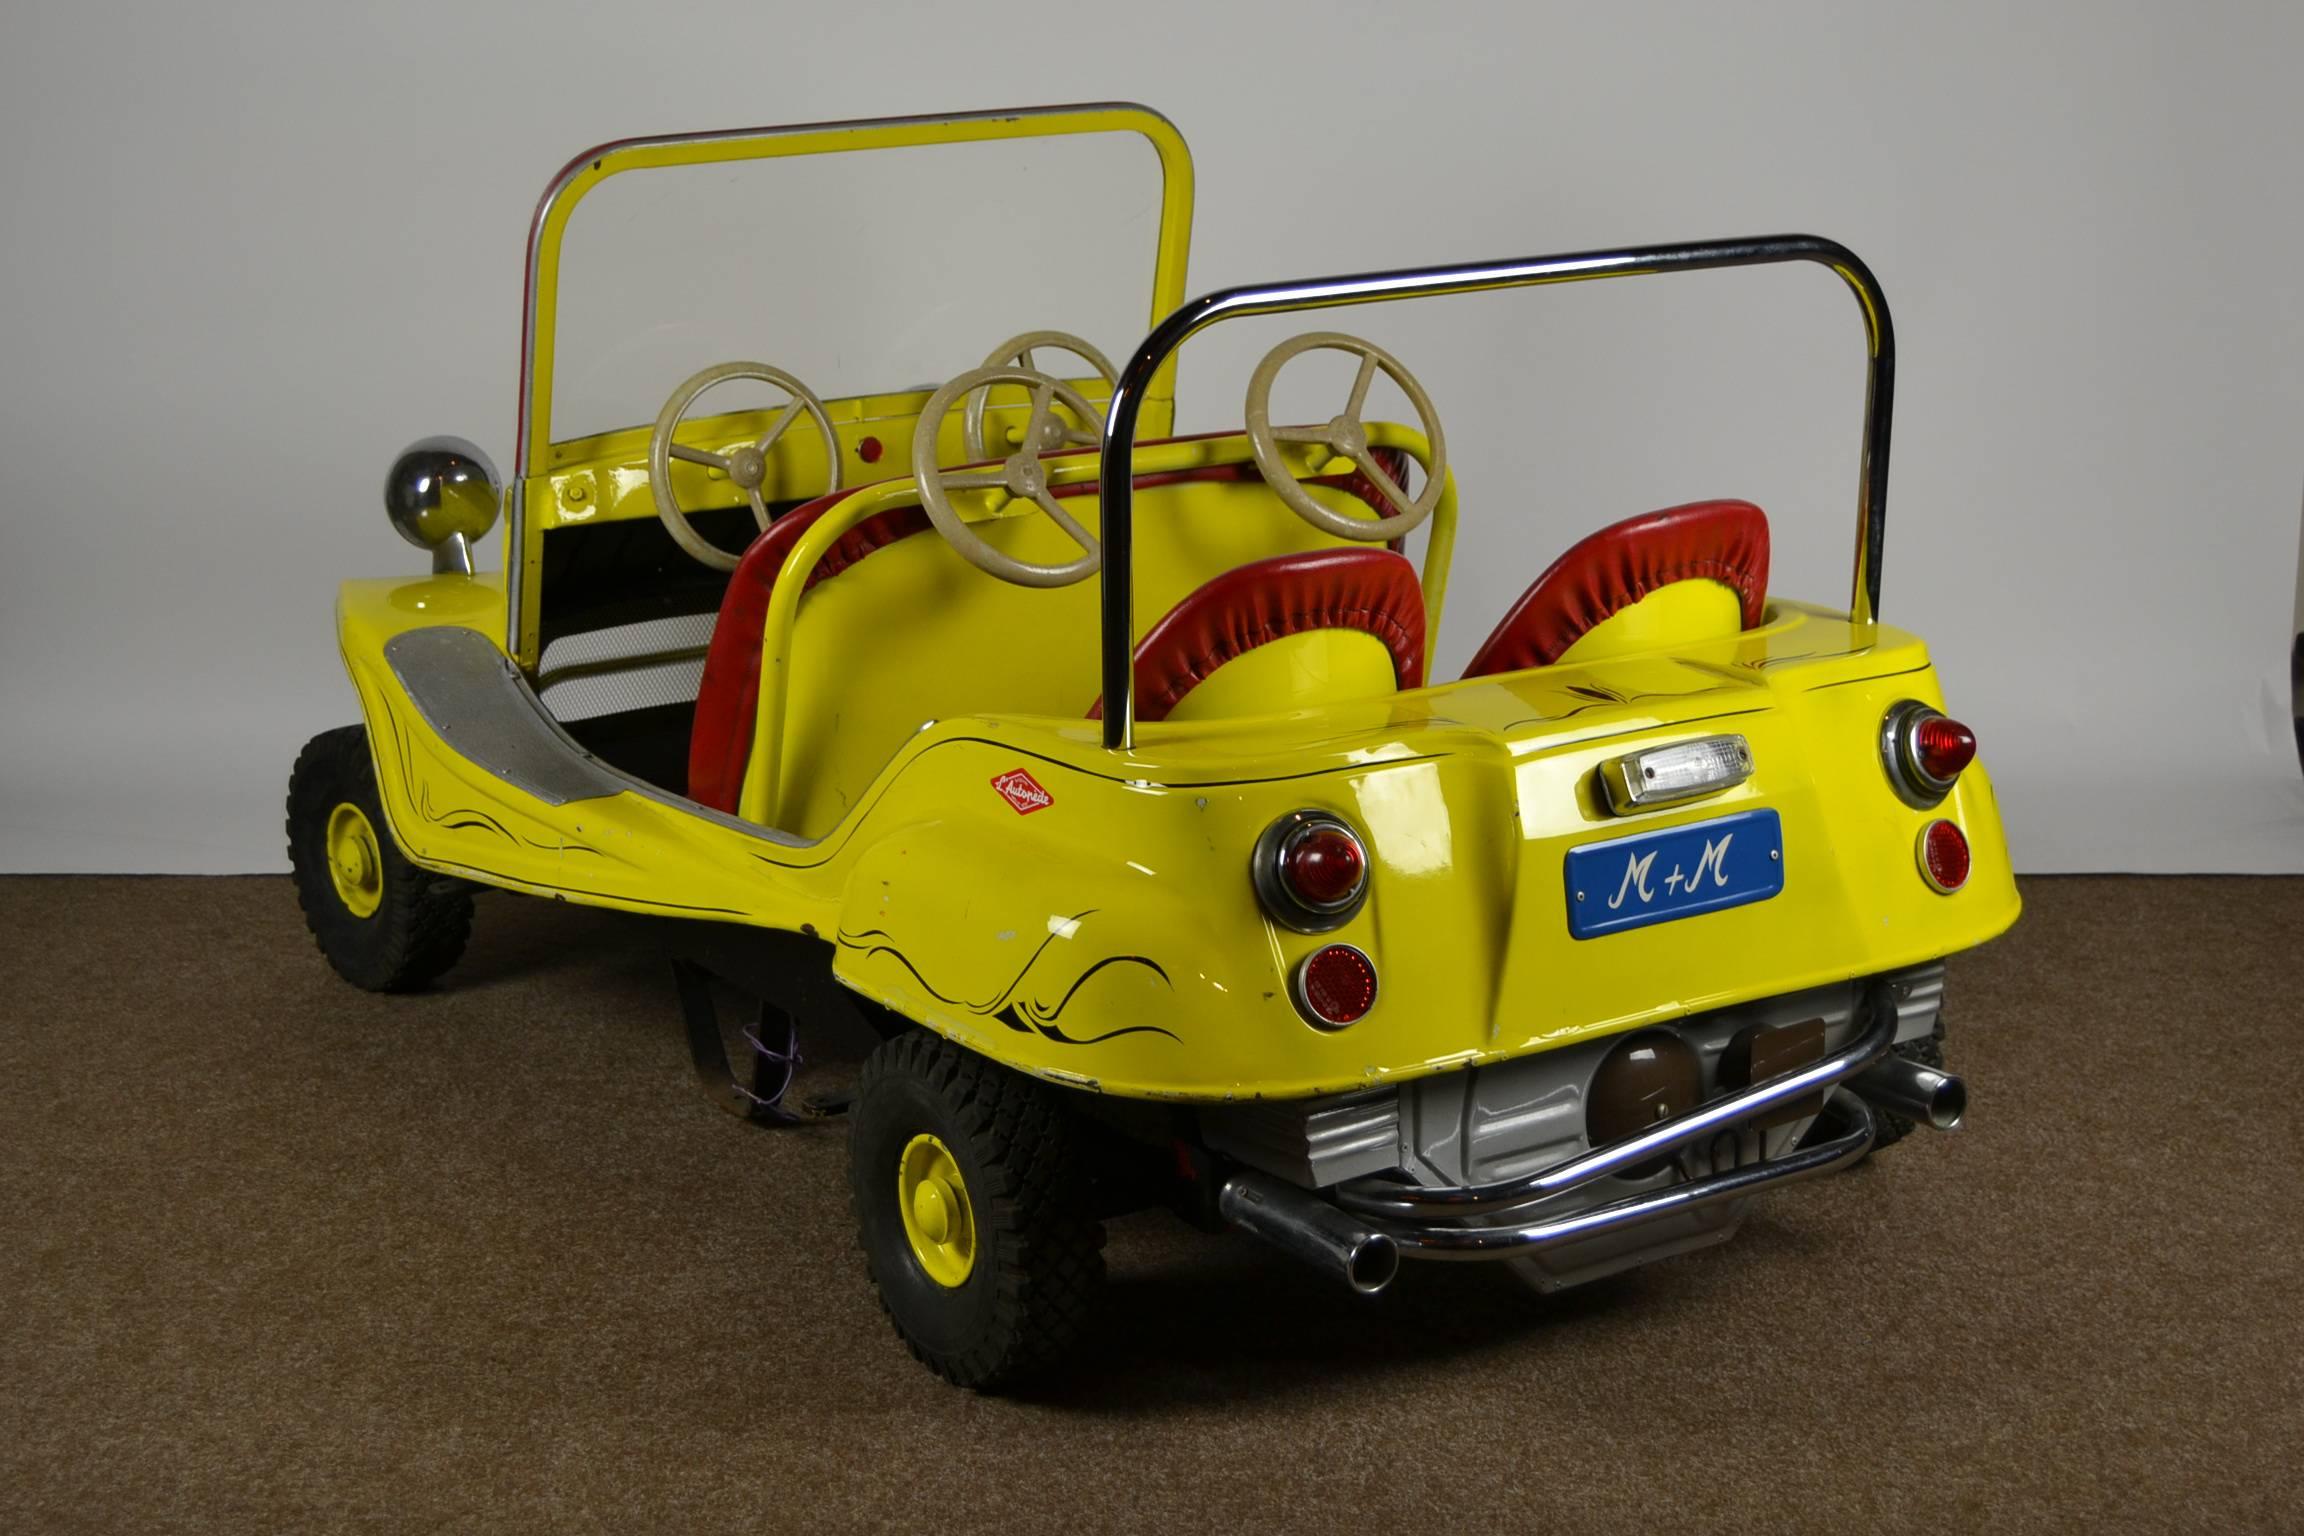 Awesome metal Carnival Ride Car .
A Dune Buggy made by the Famous L'Autopède Company - Belgium in the seventies. 
Solid handmade 4-seat metal child's car type Surf Vehicle .
Real Belgian heritage to cherish.
  